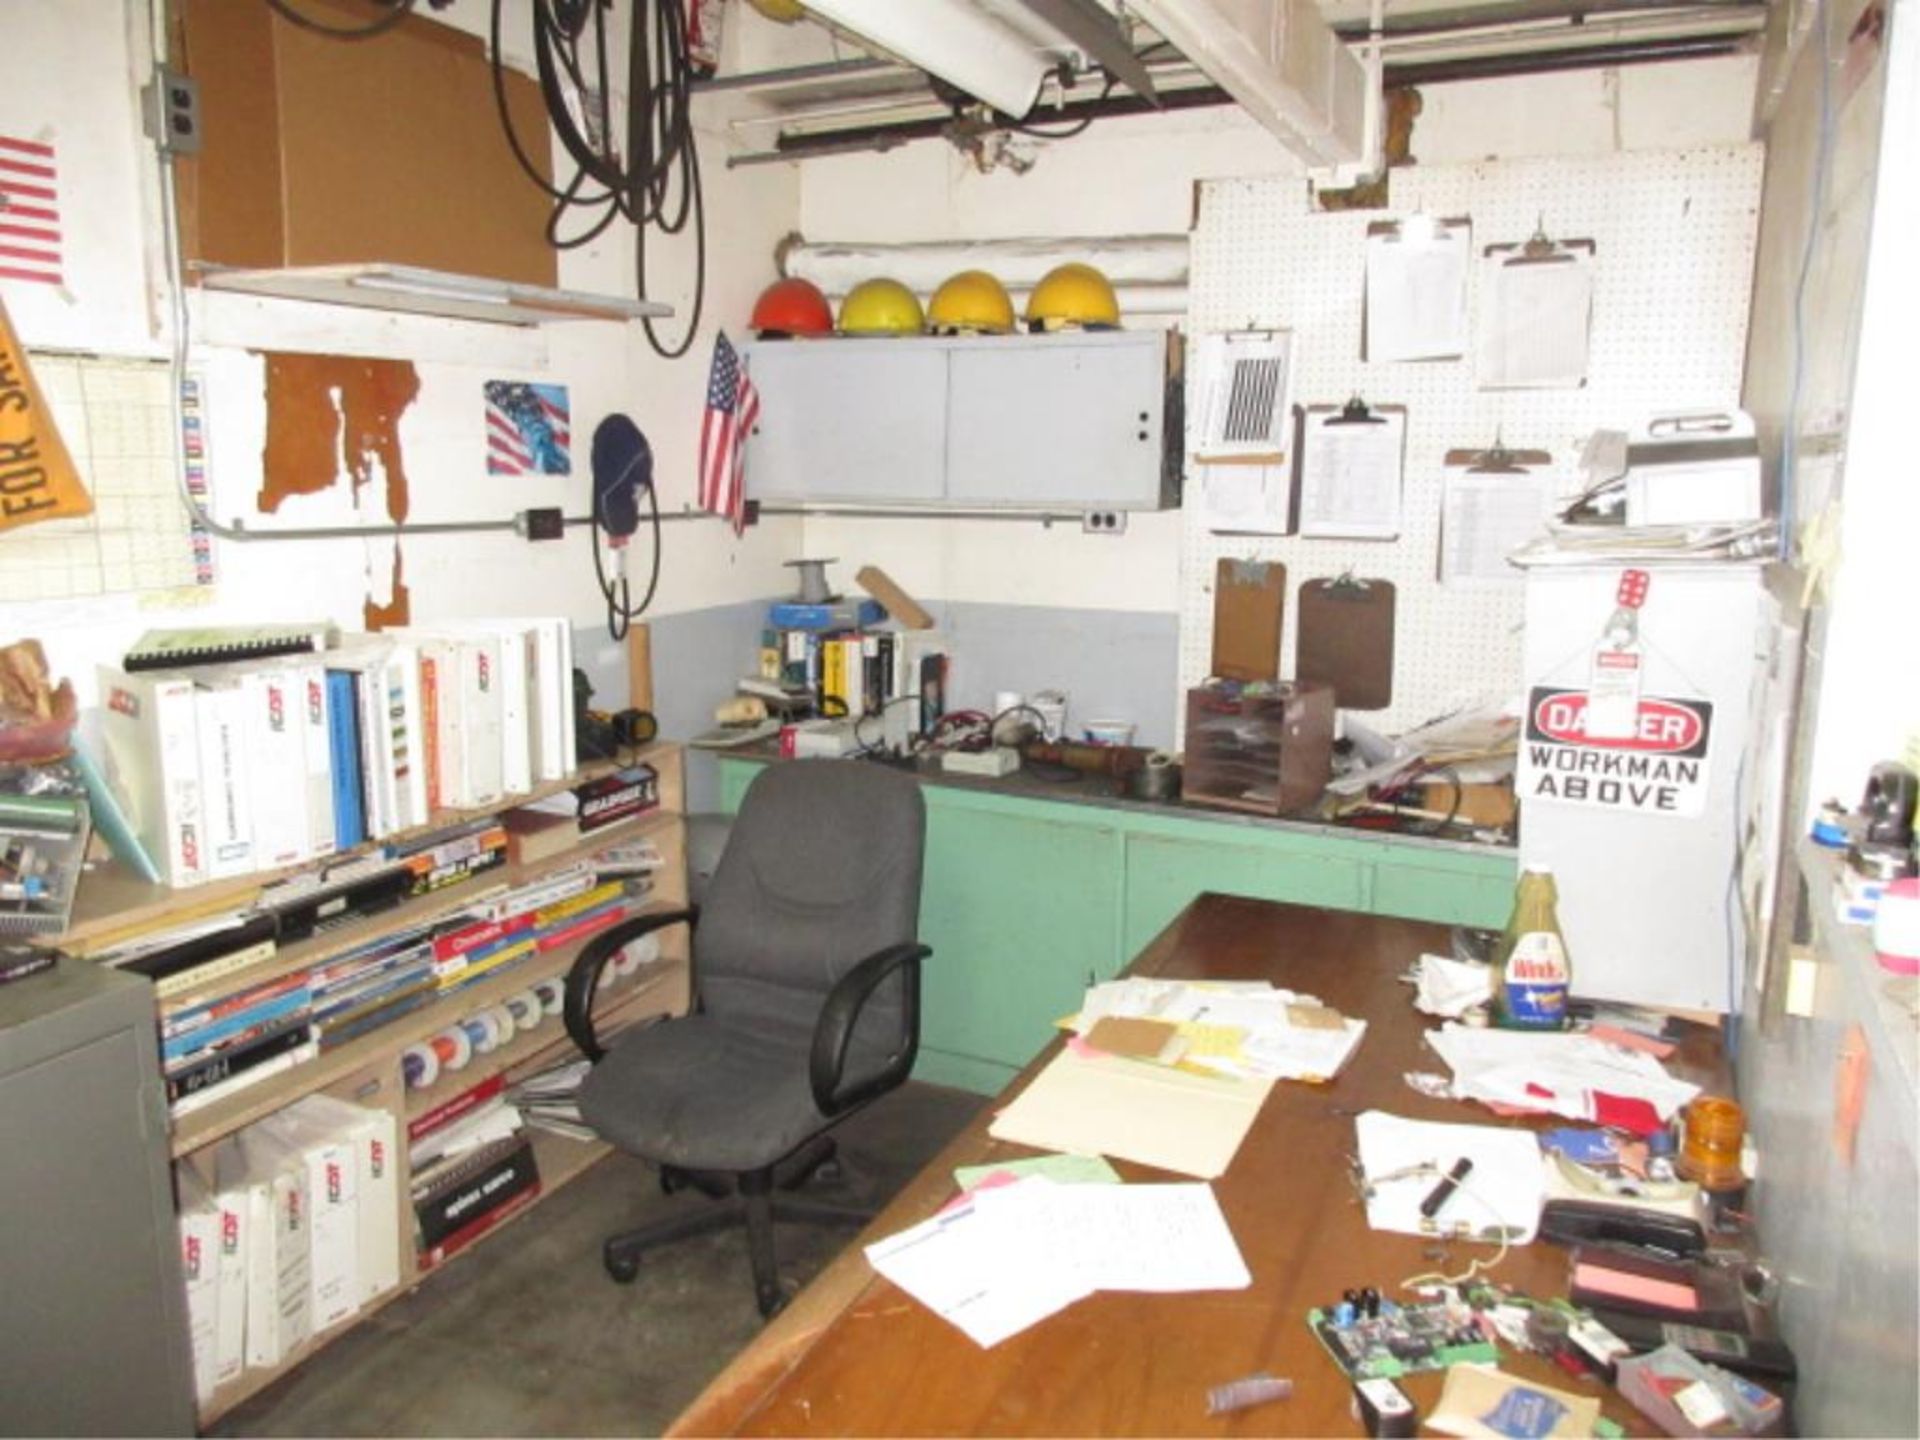 Lot Contents of Electrical Shop, includes cabinets, contents, conduit, etc. in three rooms. - Image 15 of 17